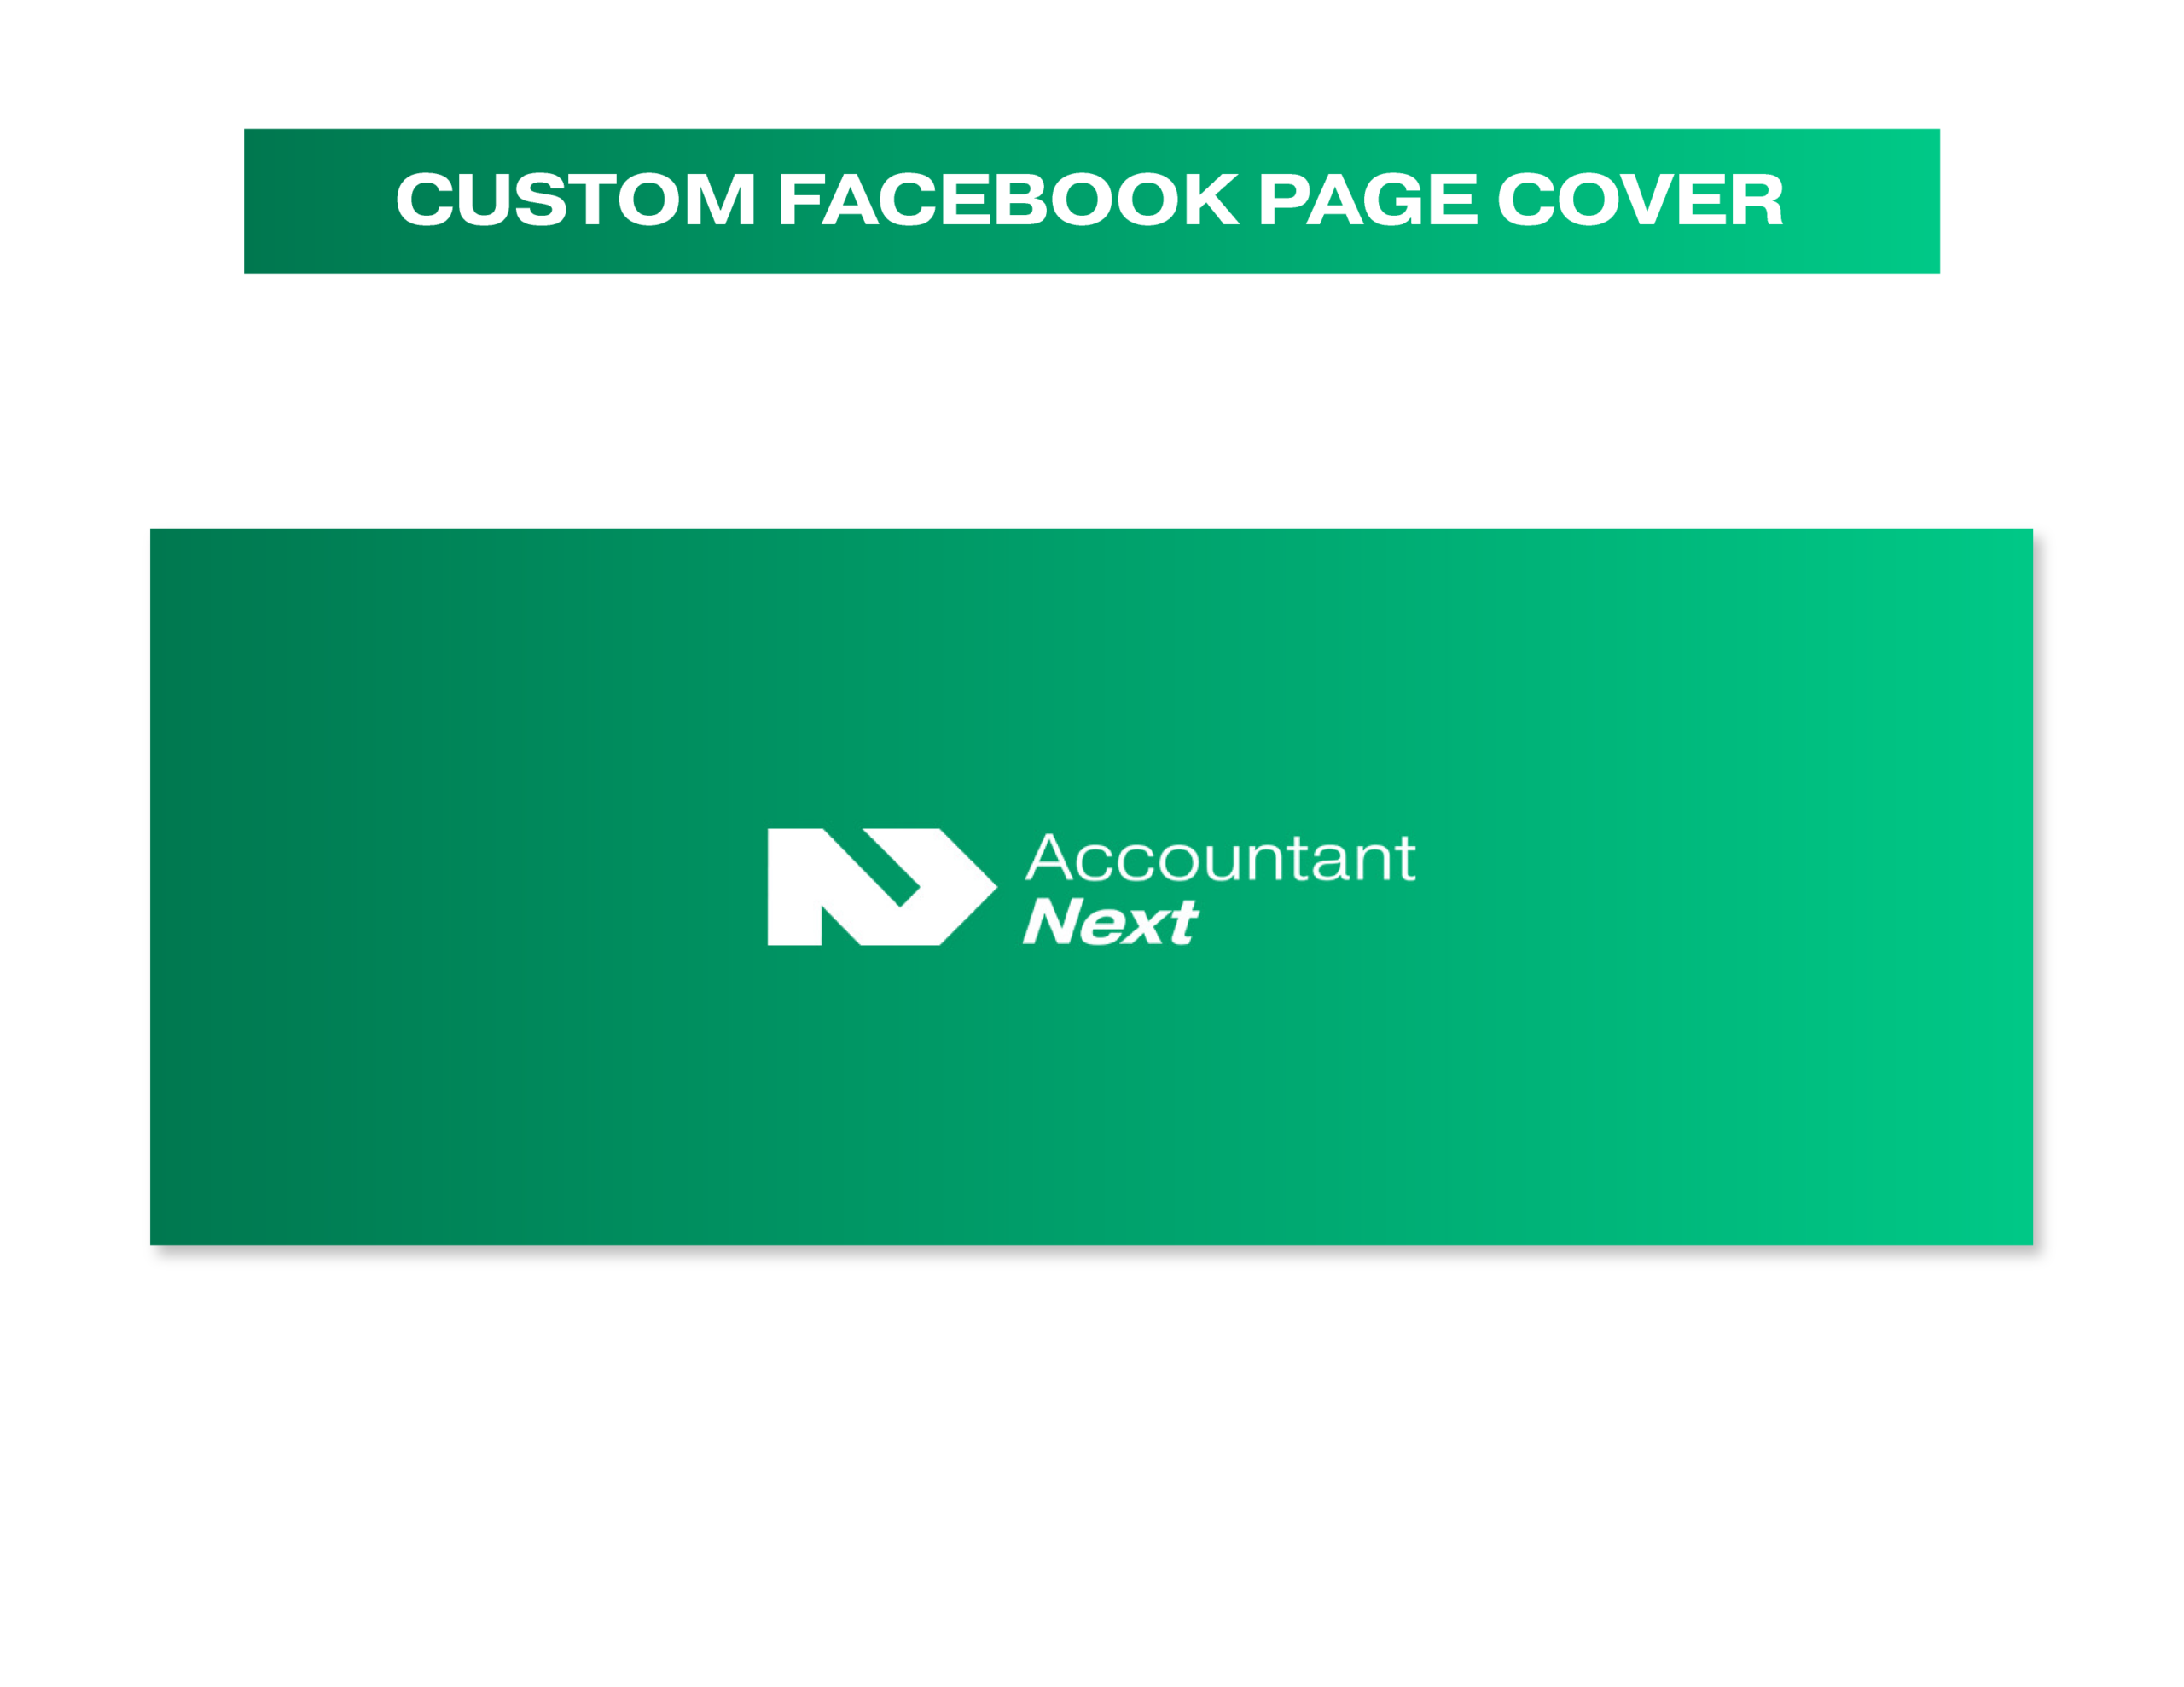 06AccountantNext_Showcase_Custom Facebook Page Cover